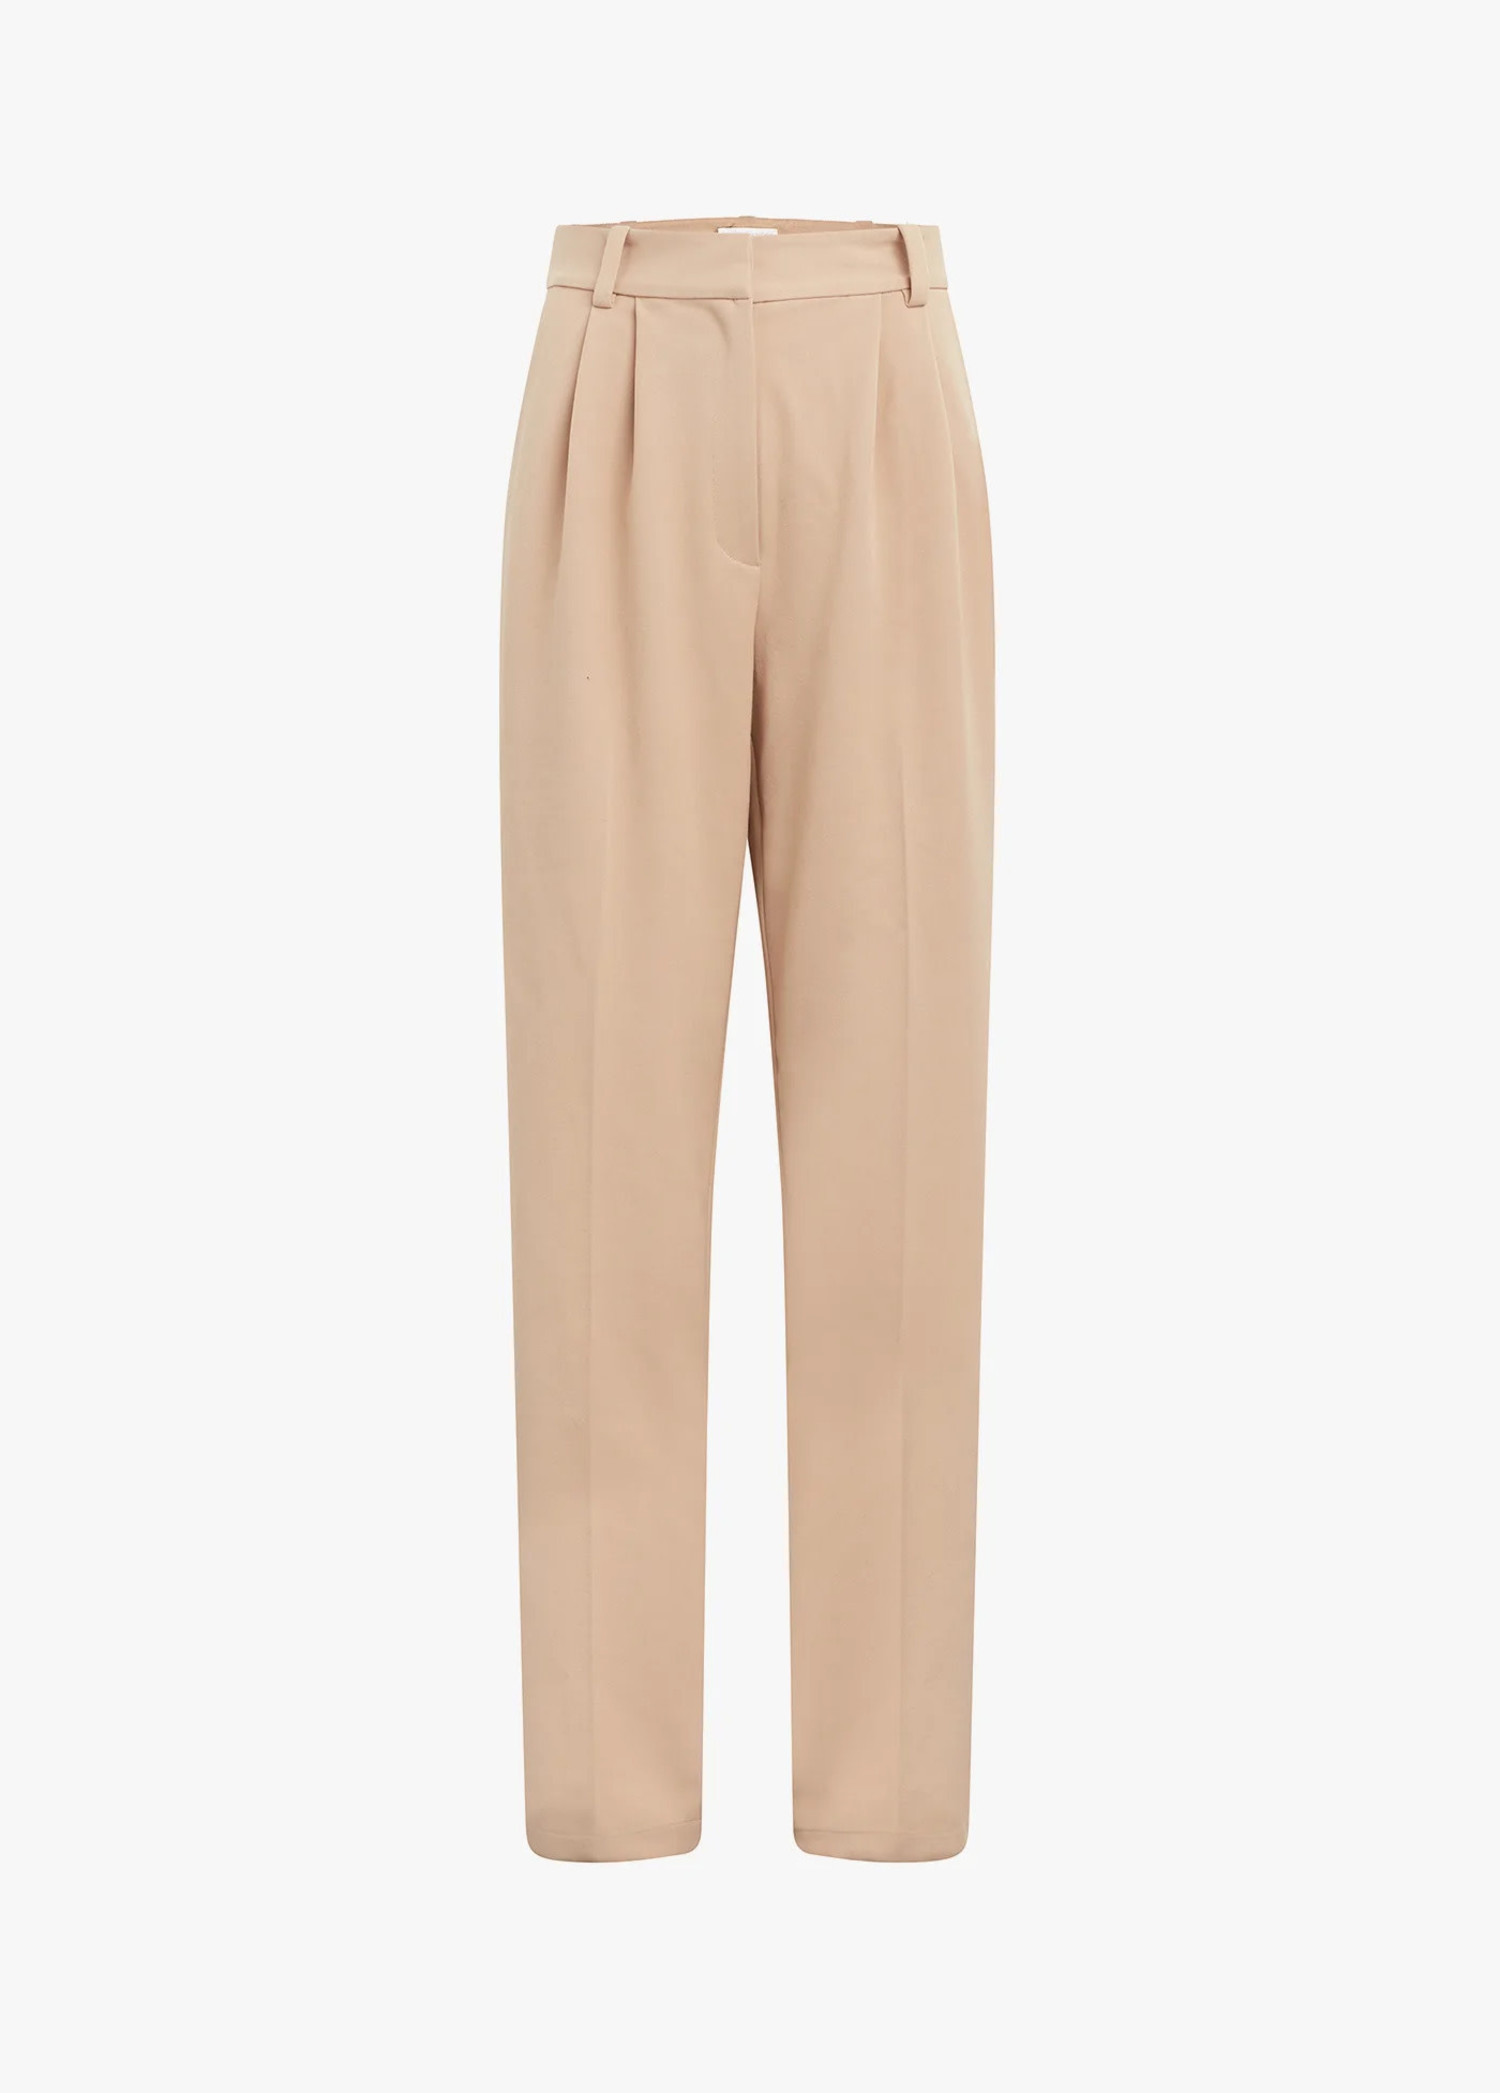 Buy Beige Trousers & Pants for Girls by Wotnot Online